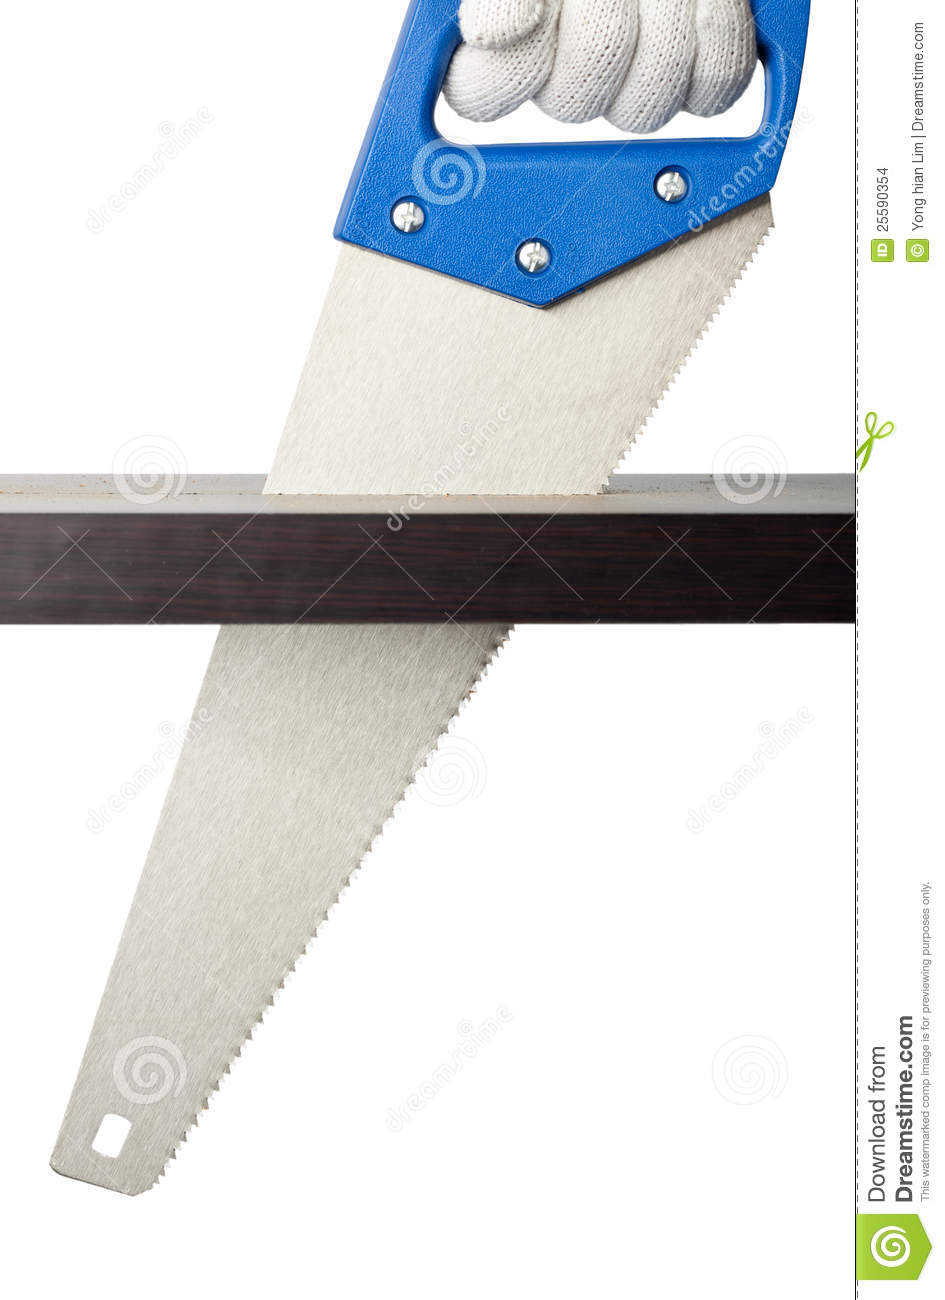 Gloved Hand Sawing A Plank Of Wood Isolated On White Background